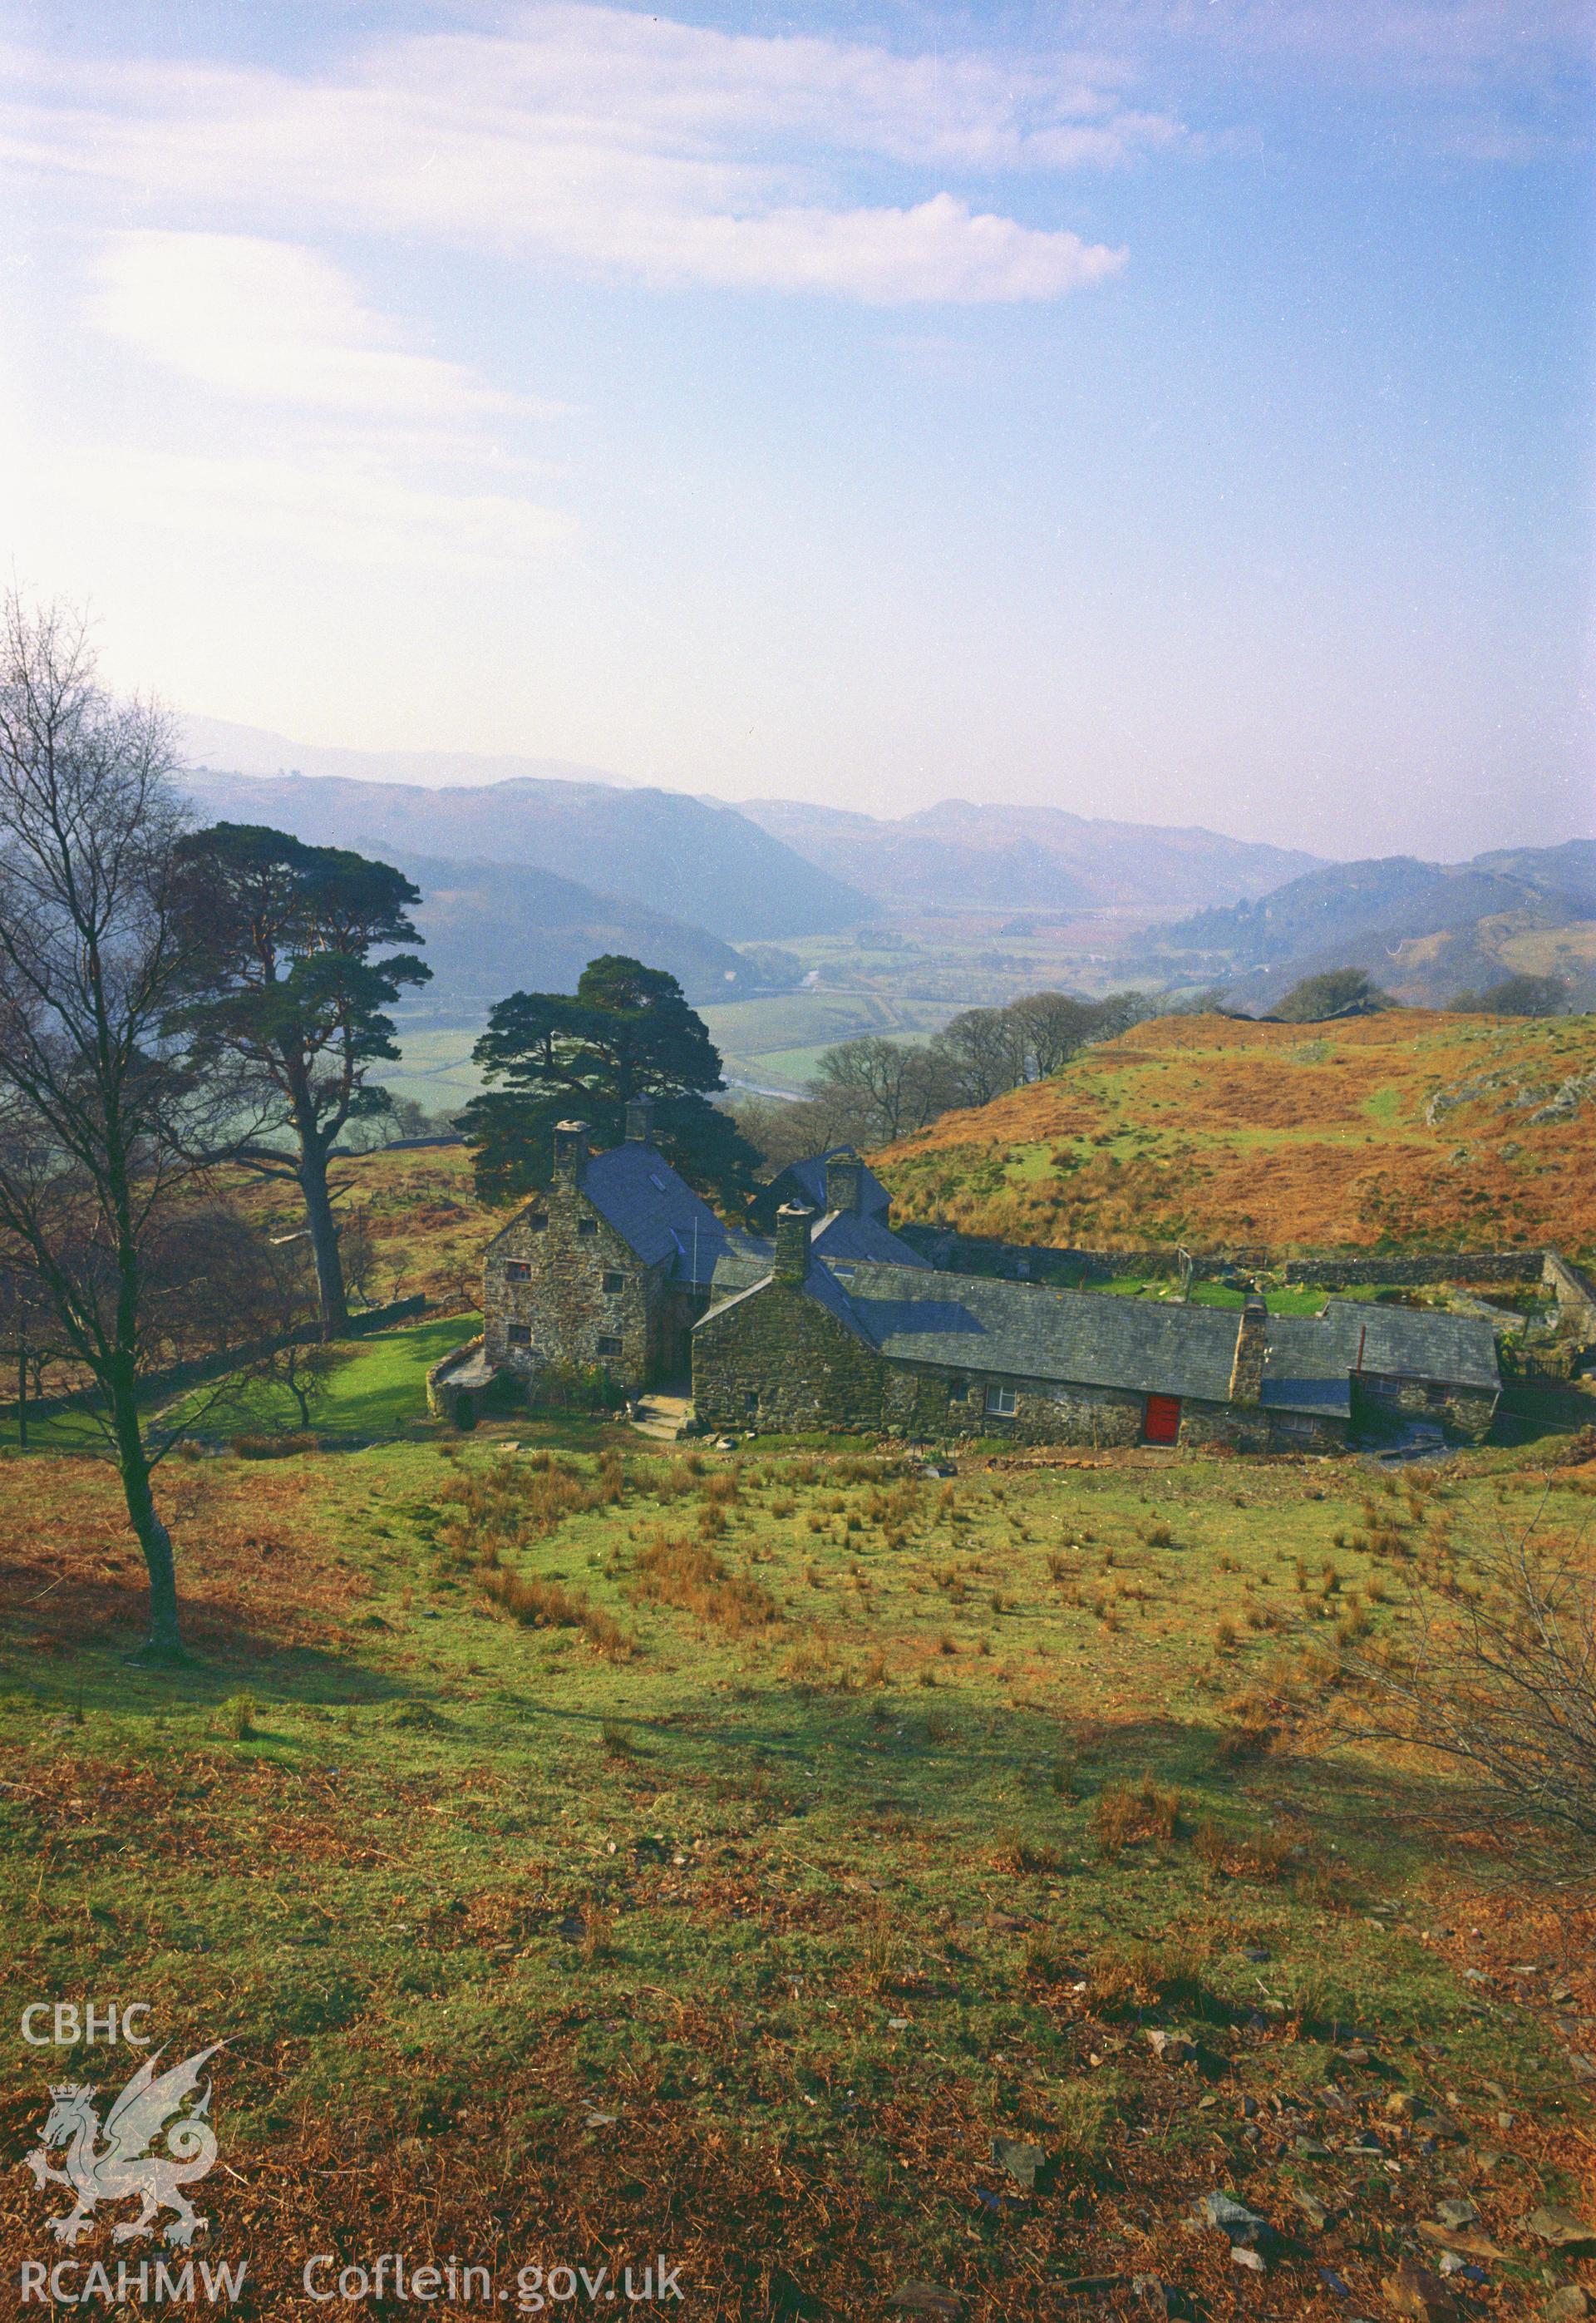 RCAHMW colour transparency showing view of Dduallt, Ffestiniog